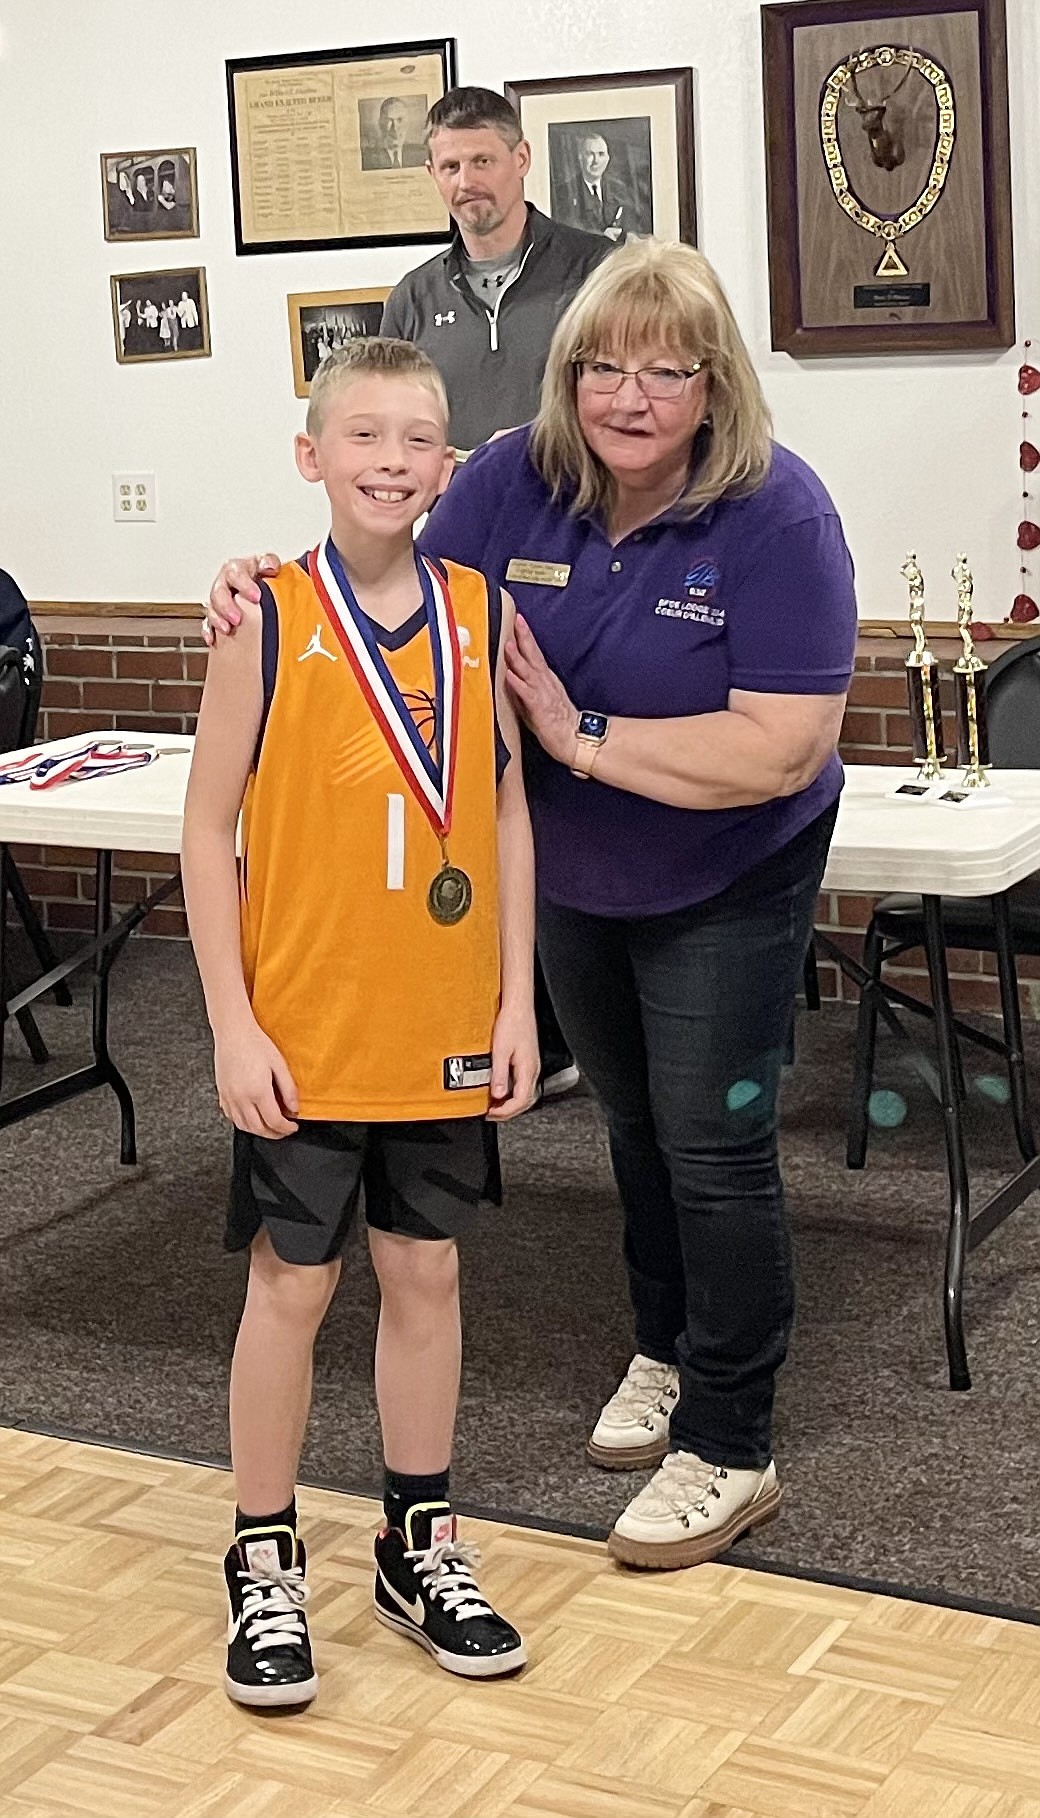 Courtesy photo
Maddox Hodges won the boys 10-11 age division at the Coeur d'Alene Elks Hoop Shoot held Feb. 20 at The Courts at Real Life in Post Falls. Also pictured is Debbi Nadrchal, Elks Exalted Ruler, and Todd Stoddard, Hoop Shoot director.